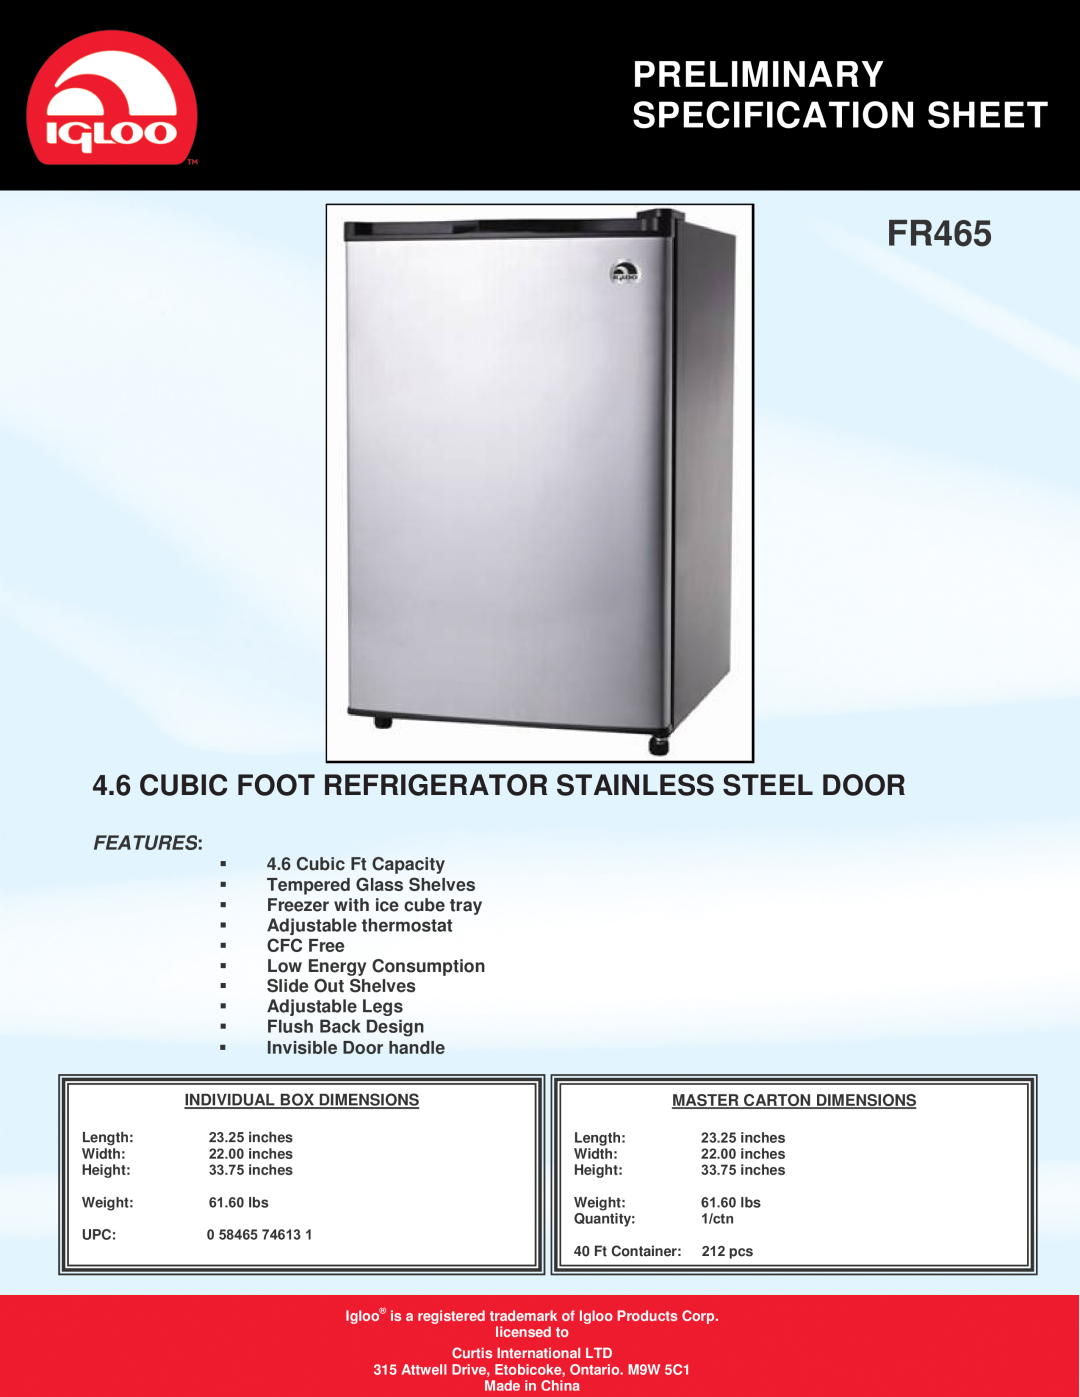 Igloo fr465 specifications Preliminary Specification Sheet, FR465, Cubic Foot Refrigerator Stainless Steel Door, Features 